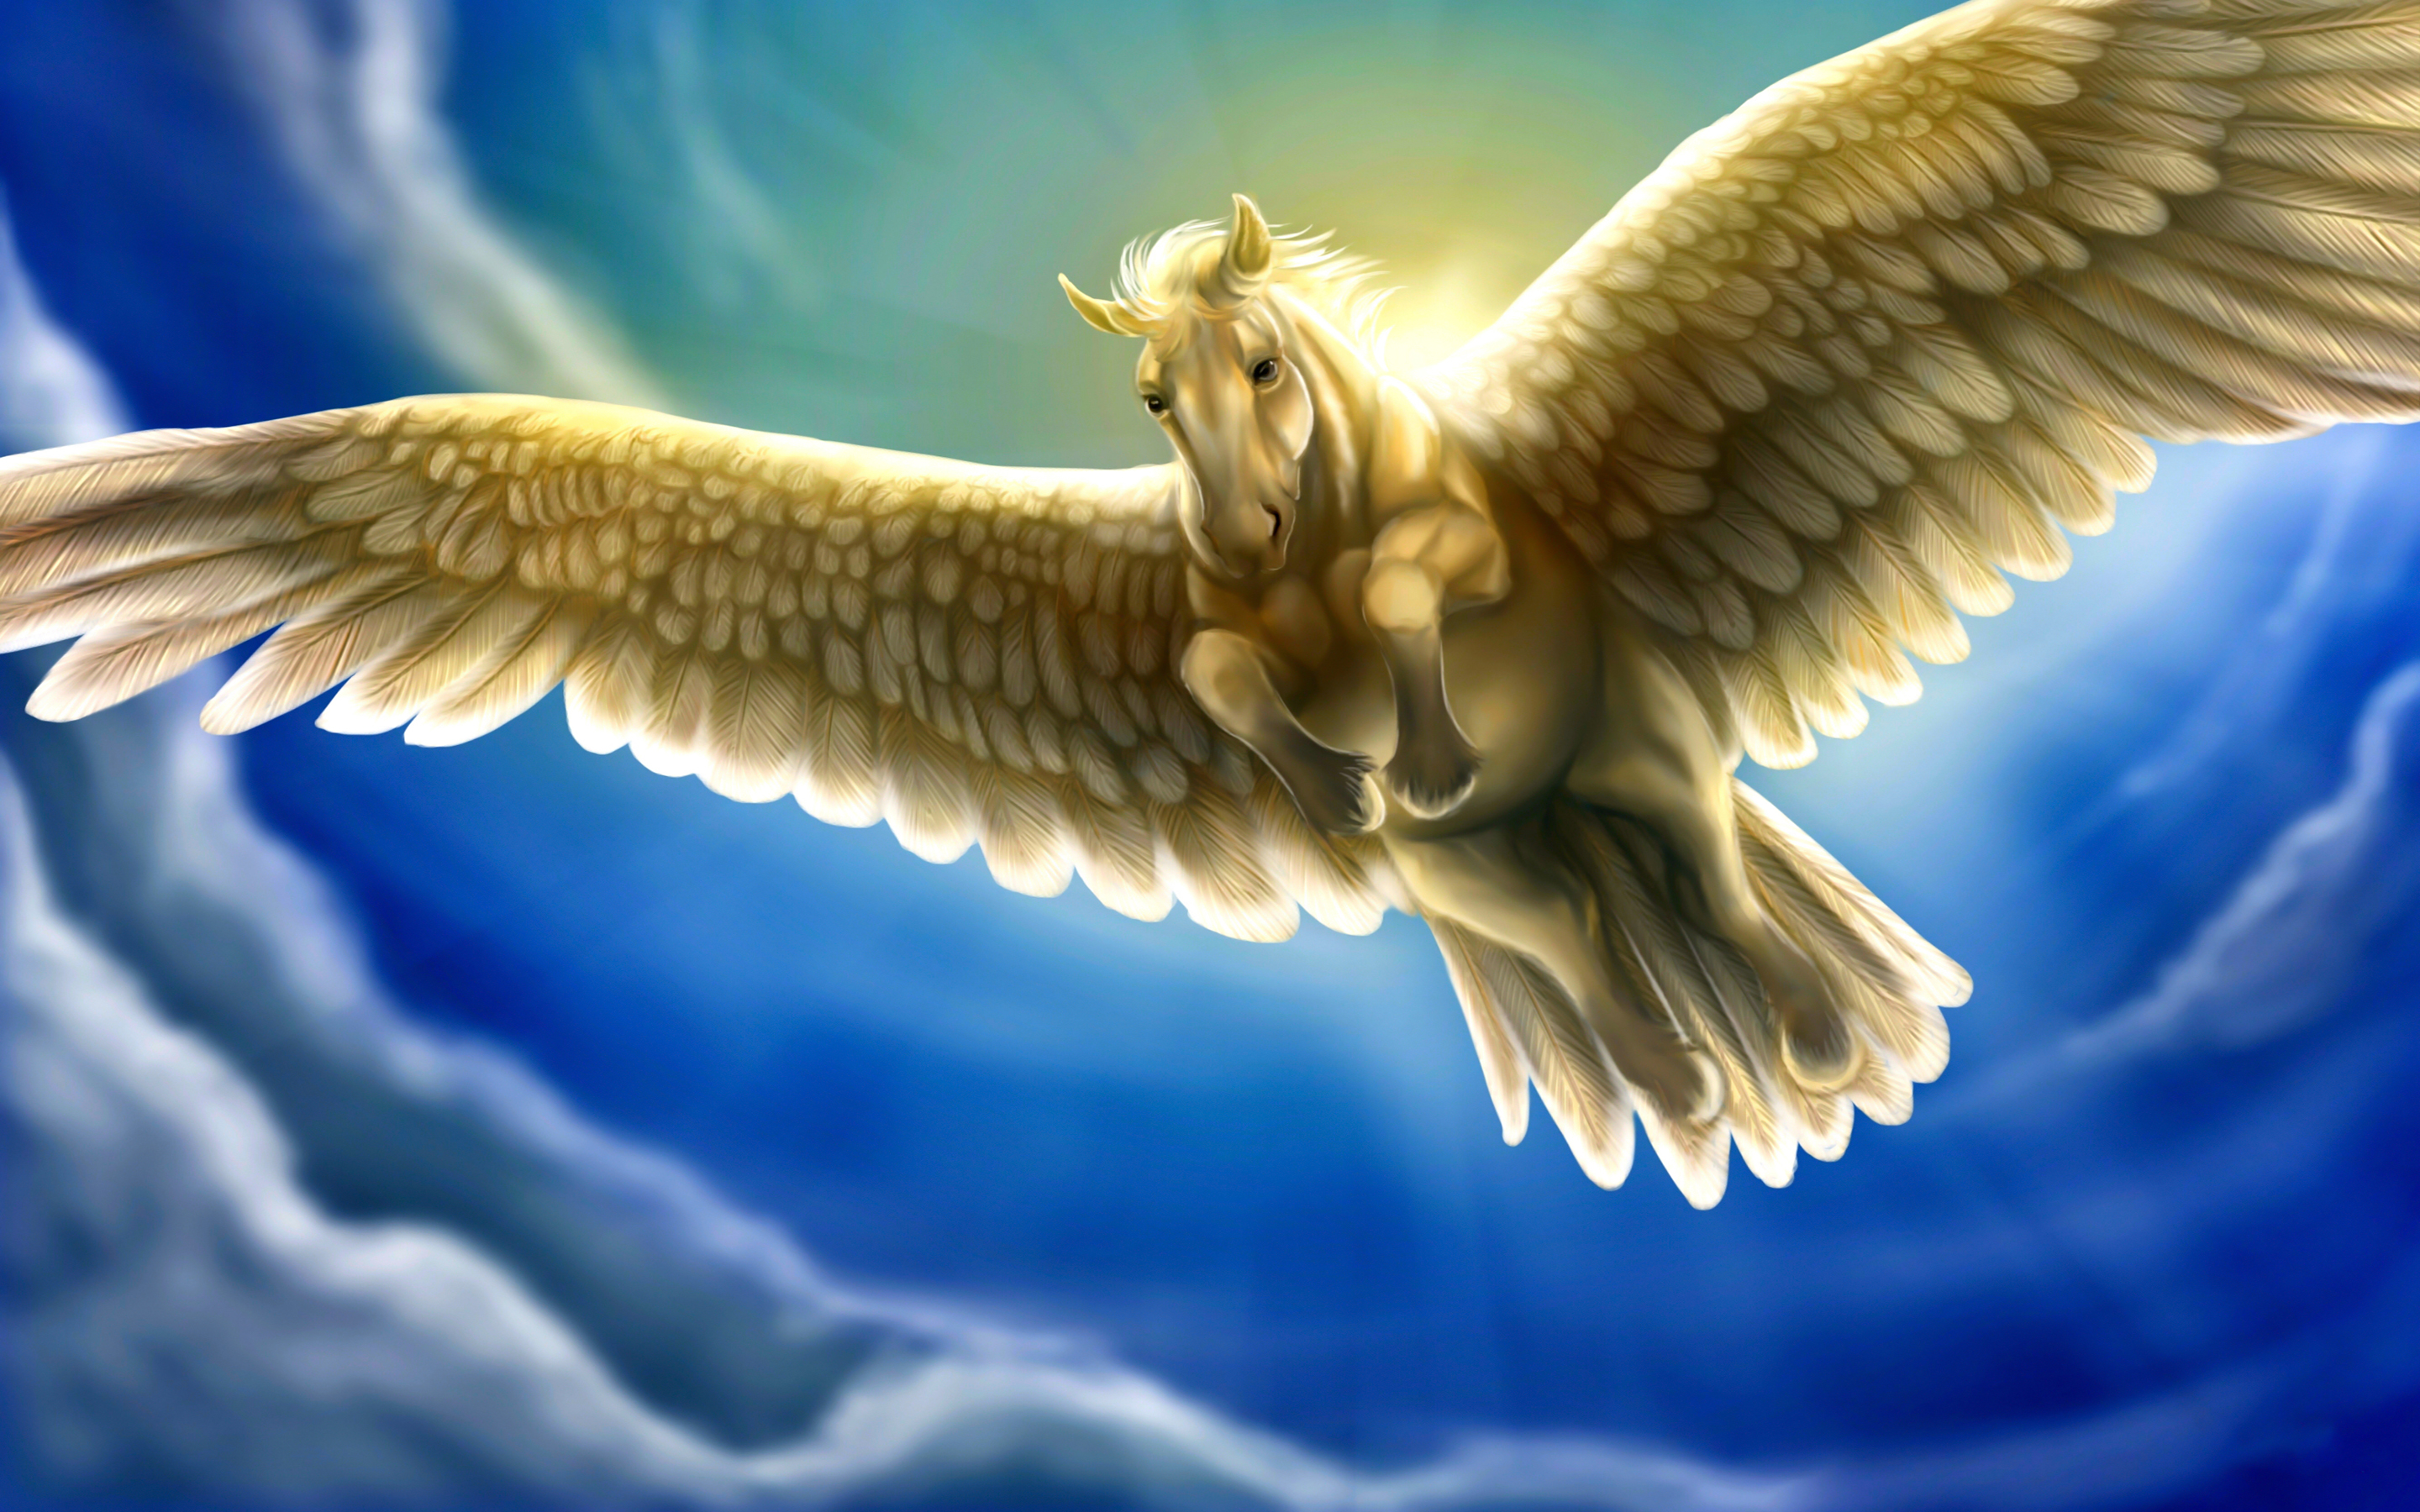 Heavenly White Horse With Wings Pegasus Fantasy Sky Blue Hd Wallpapers For Mobile  Phones And Laptops : 